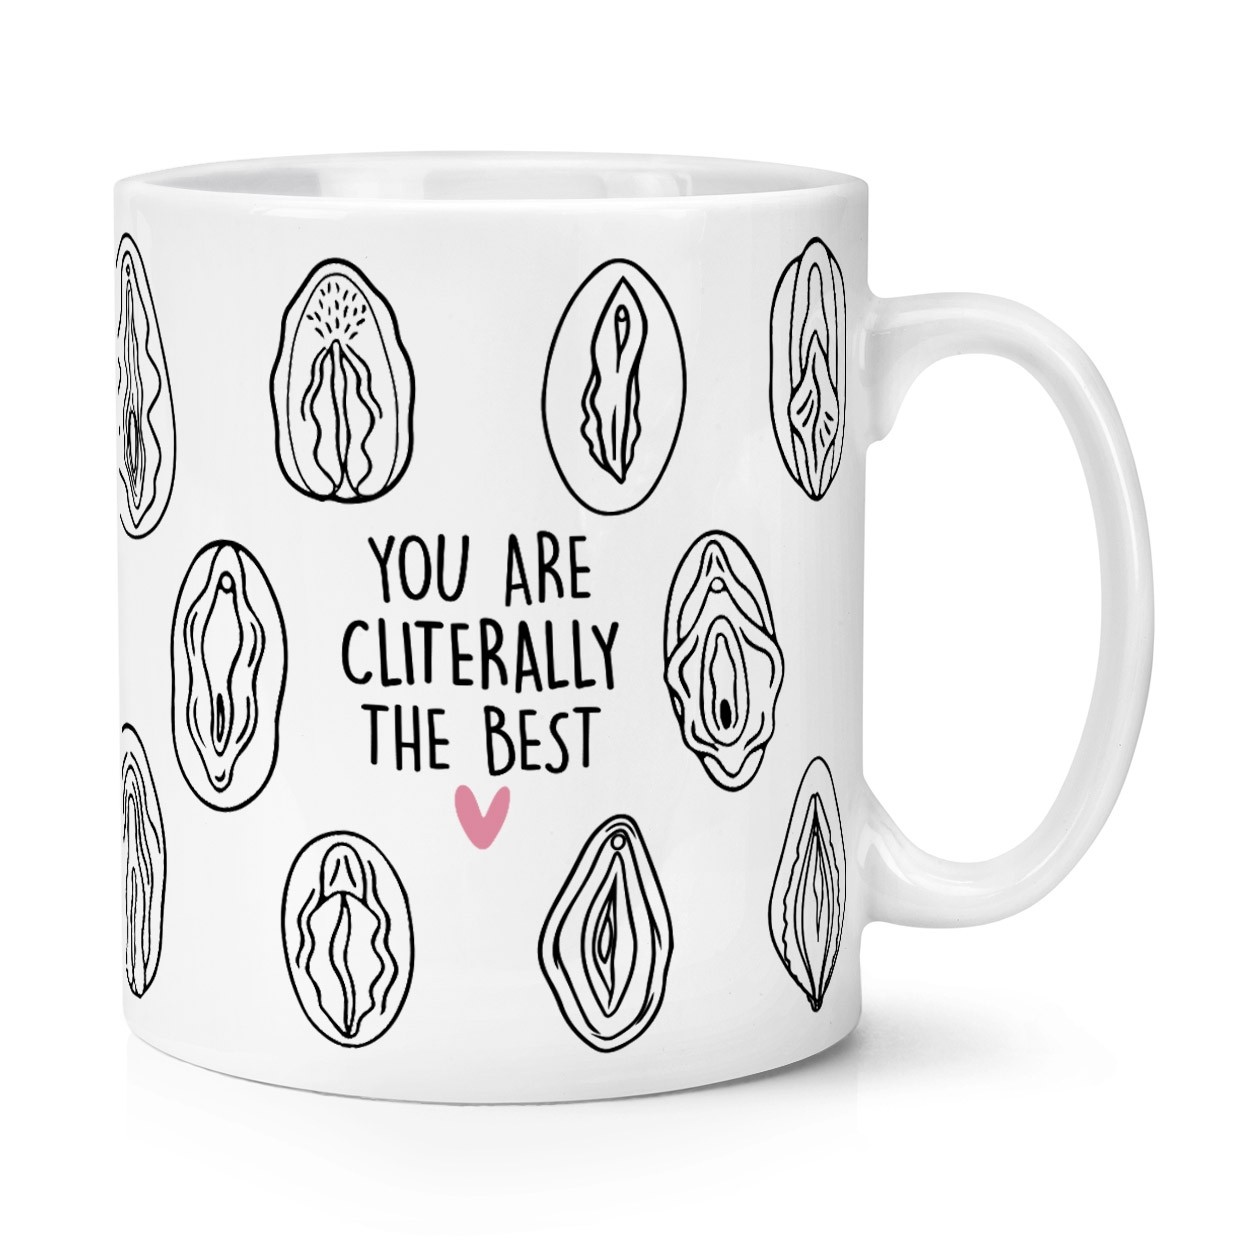 You Are Cliterally The Best 10oz Mug Cup Funny Rude Joke Literally Pun Awesome Friend